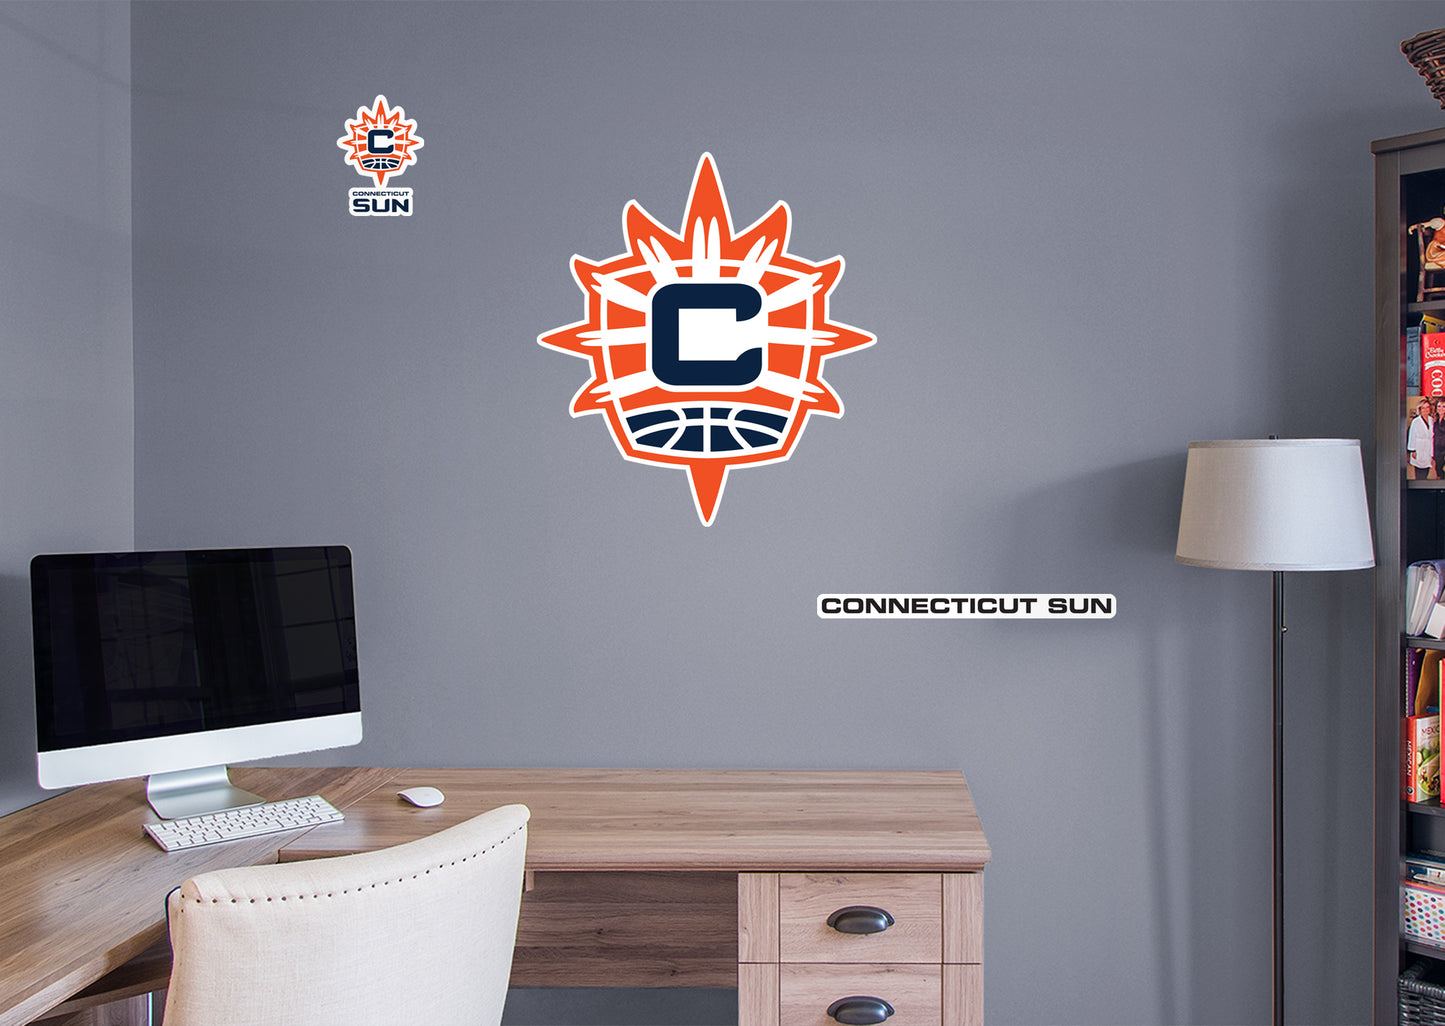 Connecticut Sun: Connecticut Sun 2021 Logo        - Officially Licensed WNBA Removable Wall   Adhesive Decal